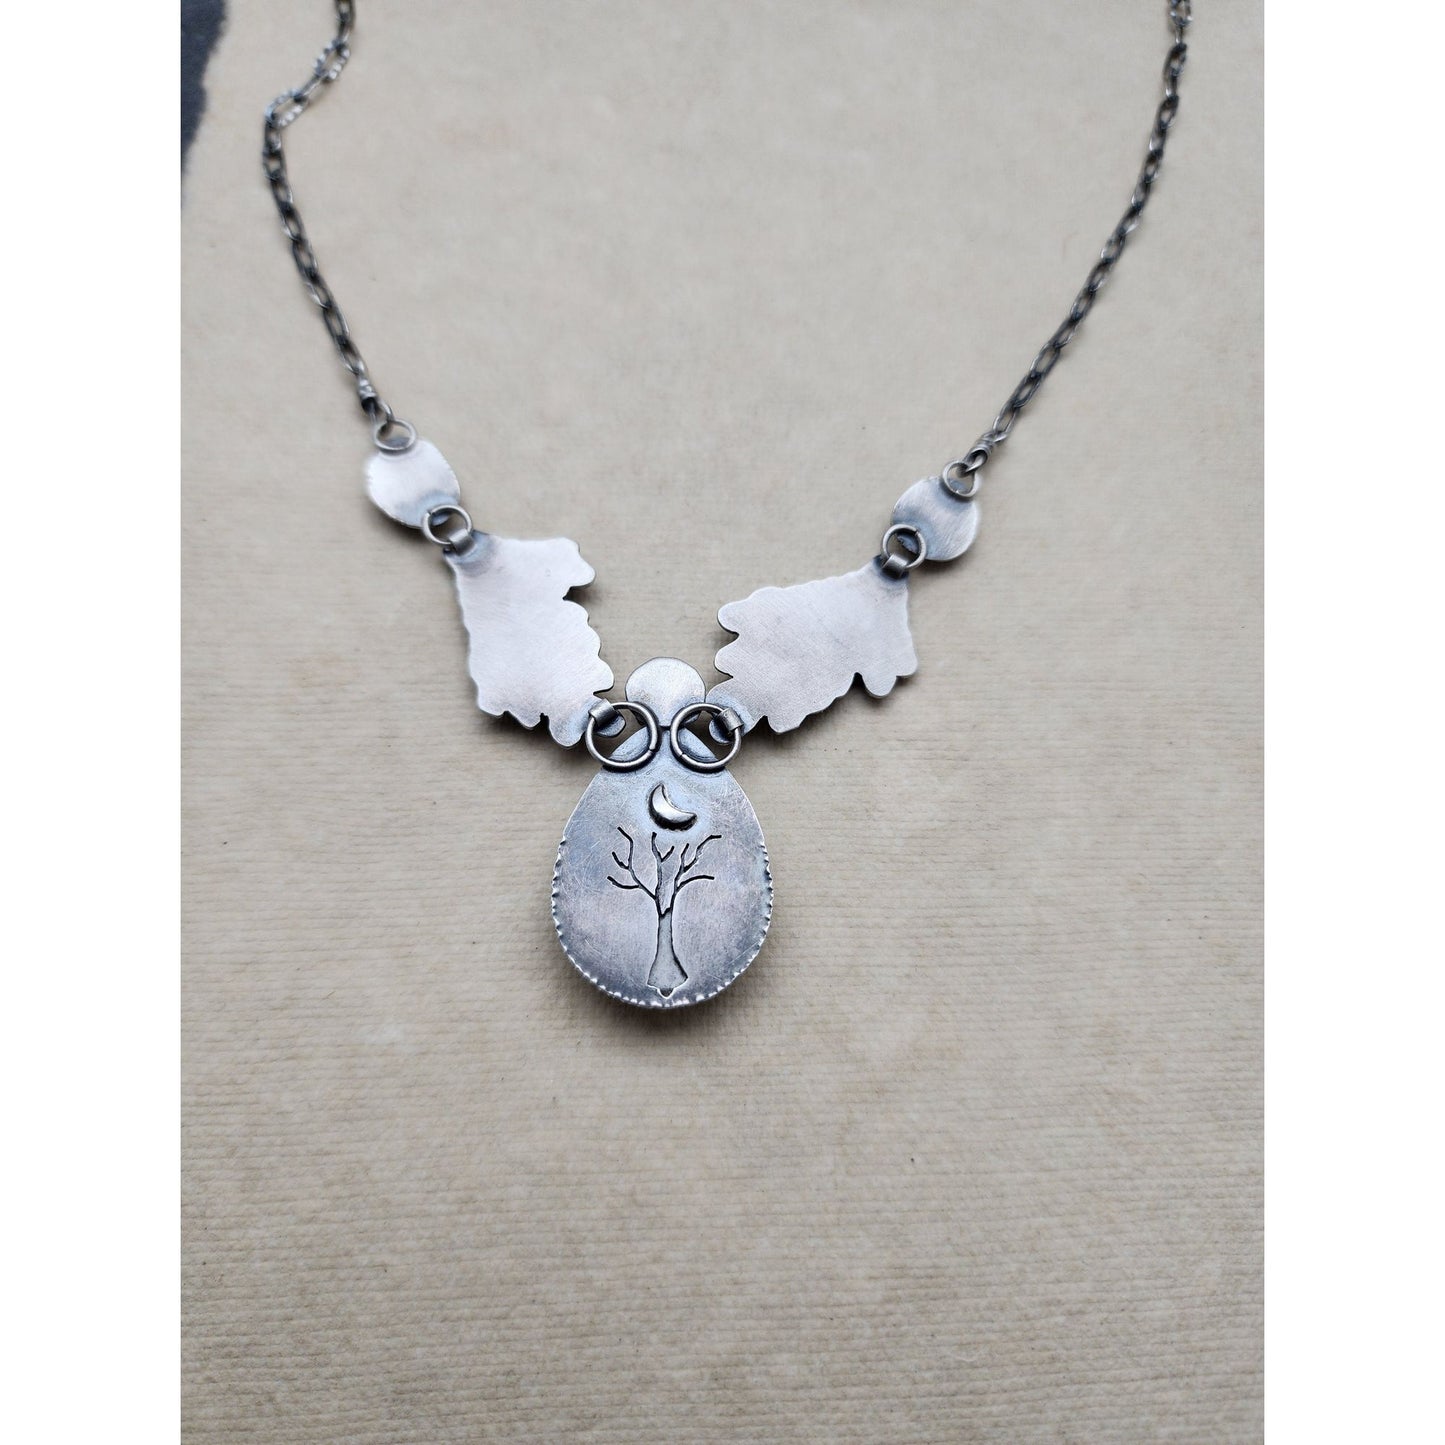 Queen Of The North necklace